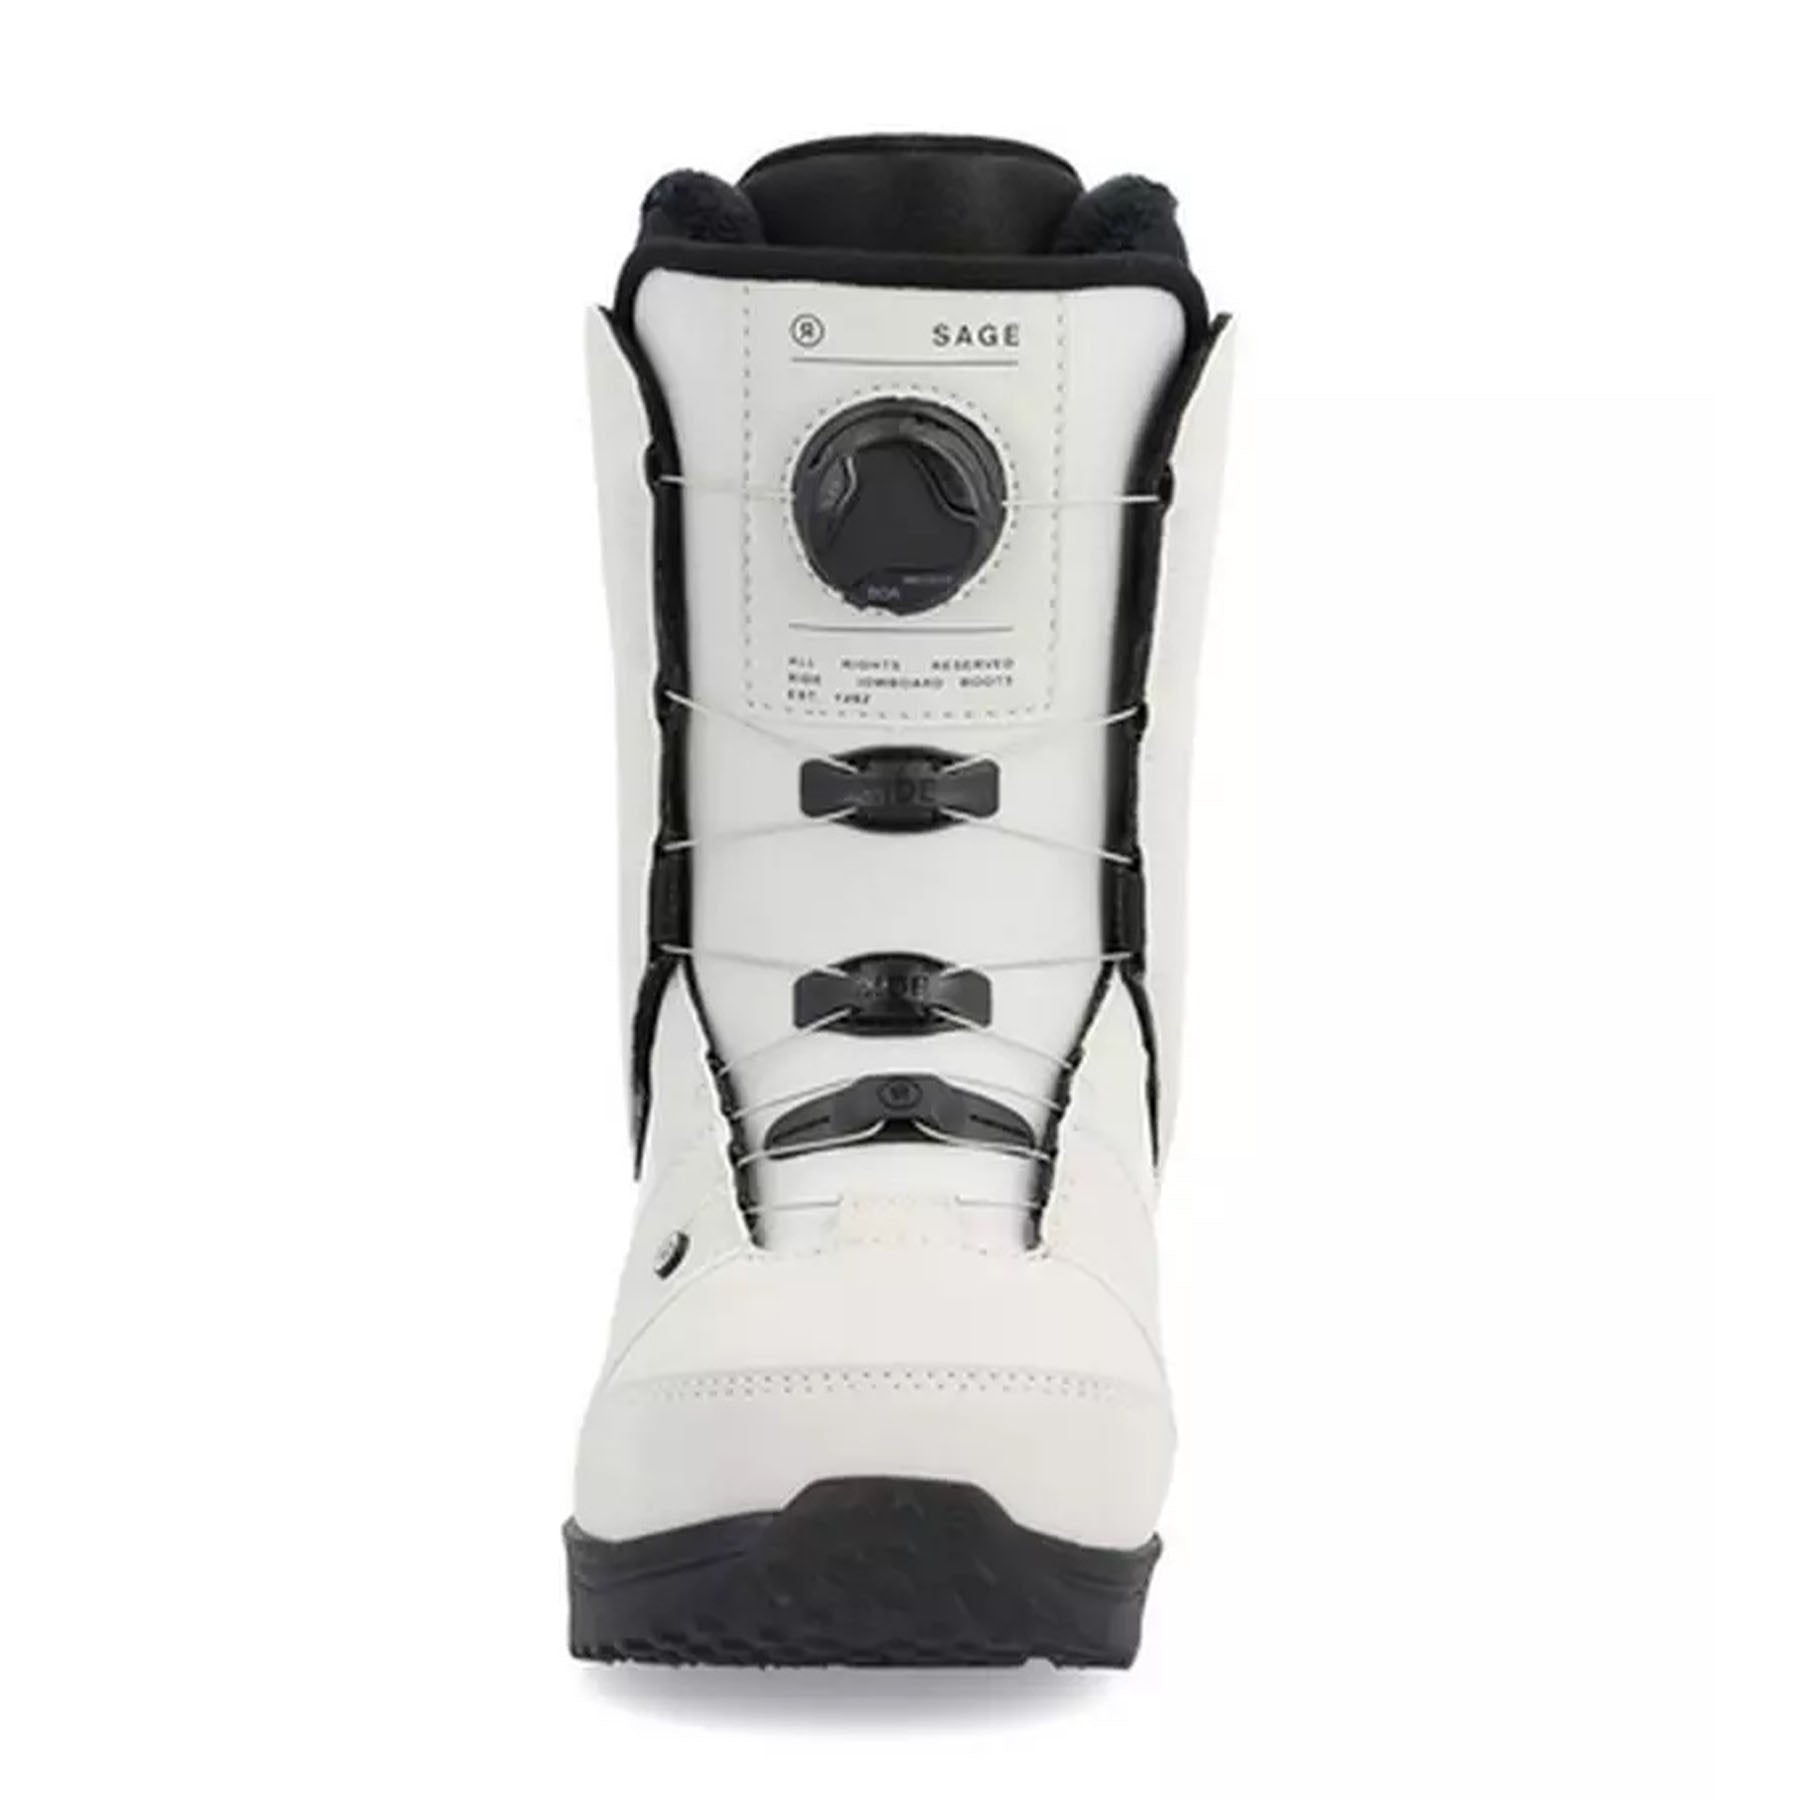 Image features the front of the Ride snowboard boot in grey with black trim and a black sole.